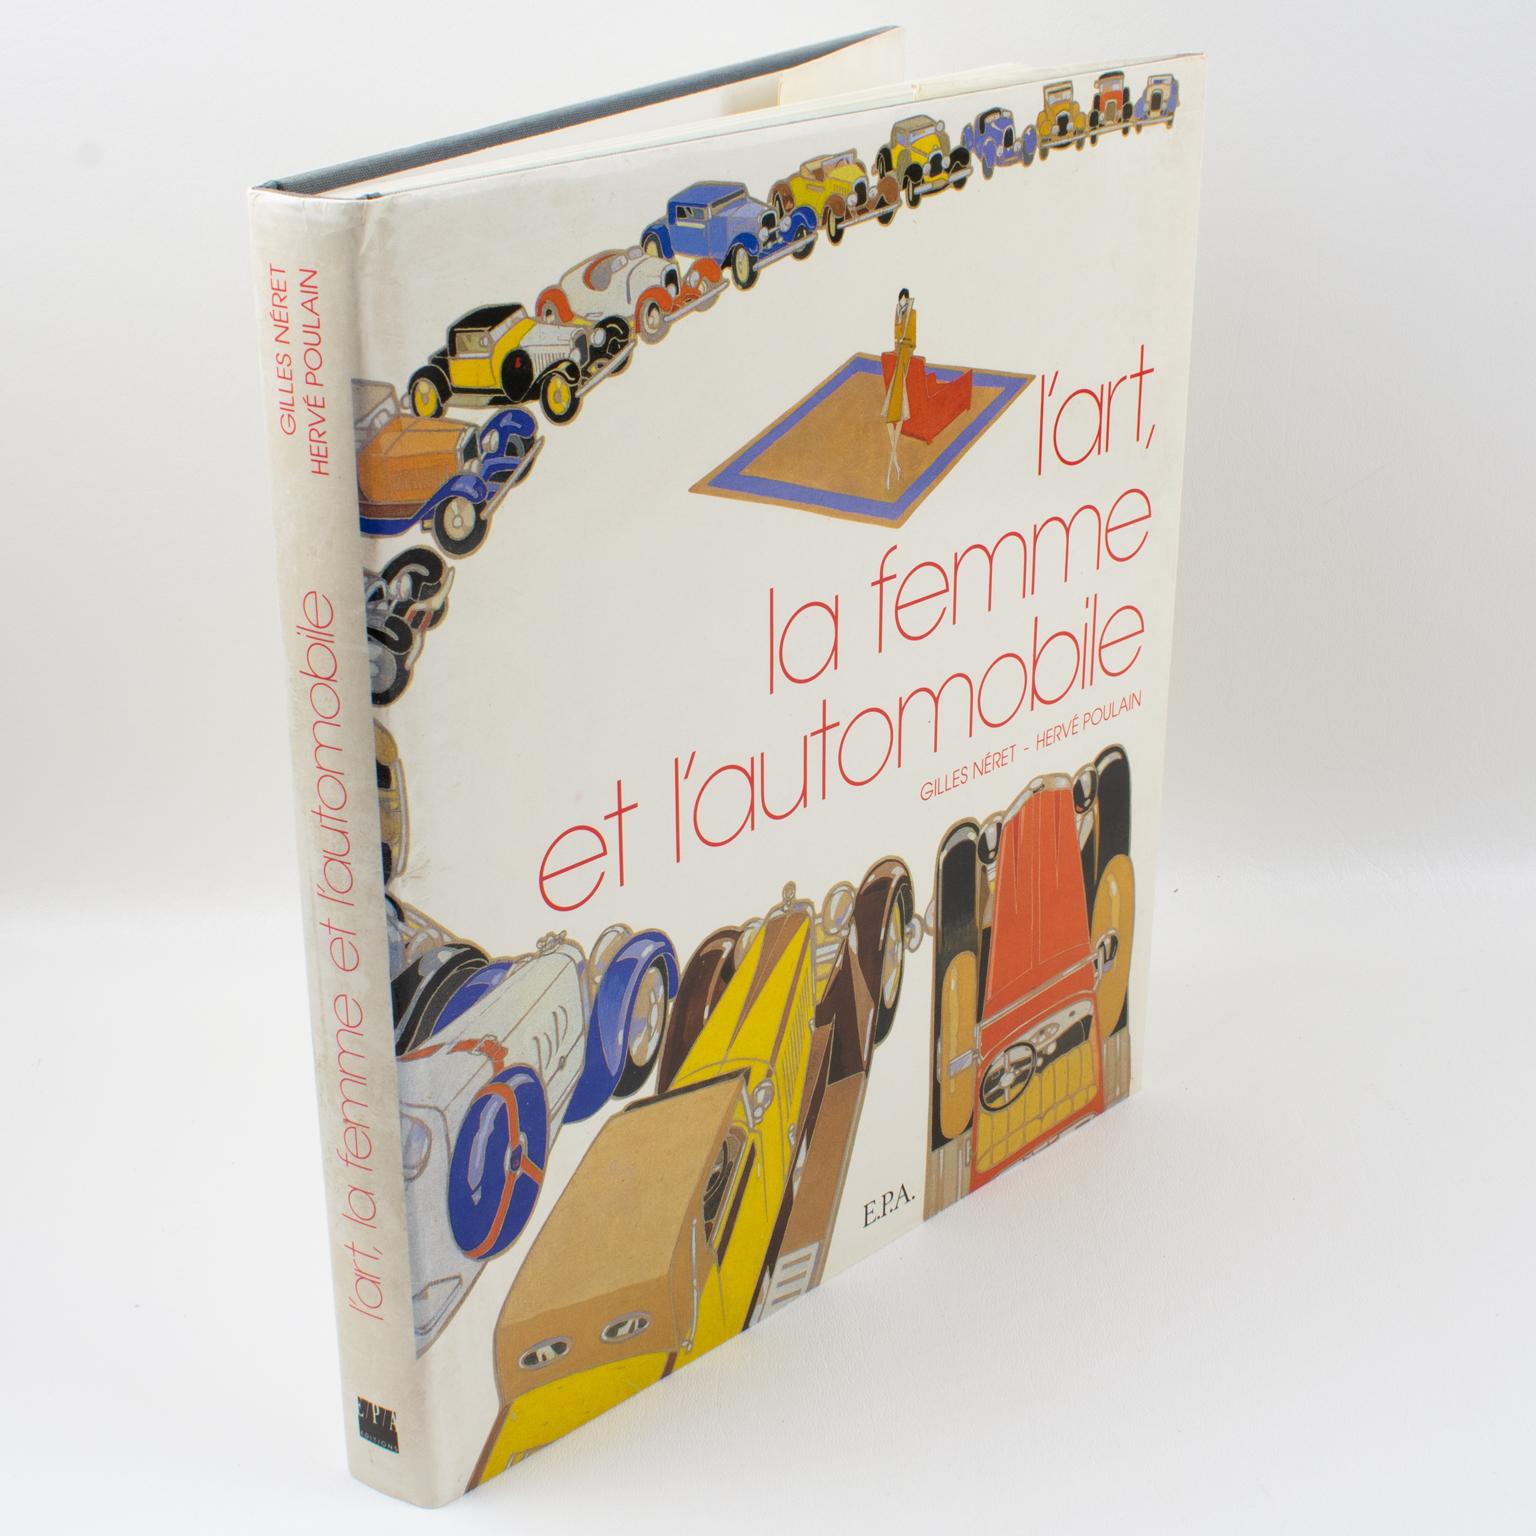 L’Art, la Femme et L’Automobile, (Art, Woman and Cars), French Book by Gilles Néret and Hervé Poulain, 1989.
When cars started appearing at the end of the 19th century, people hesitated about the nature of their sex. How should we qualify an